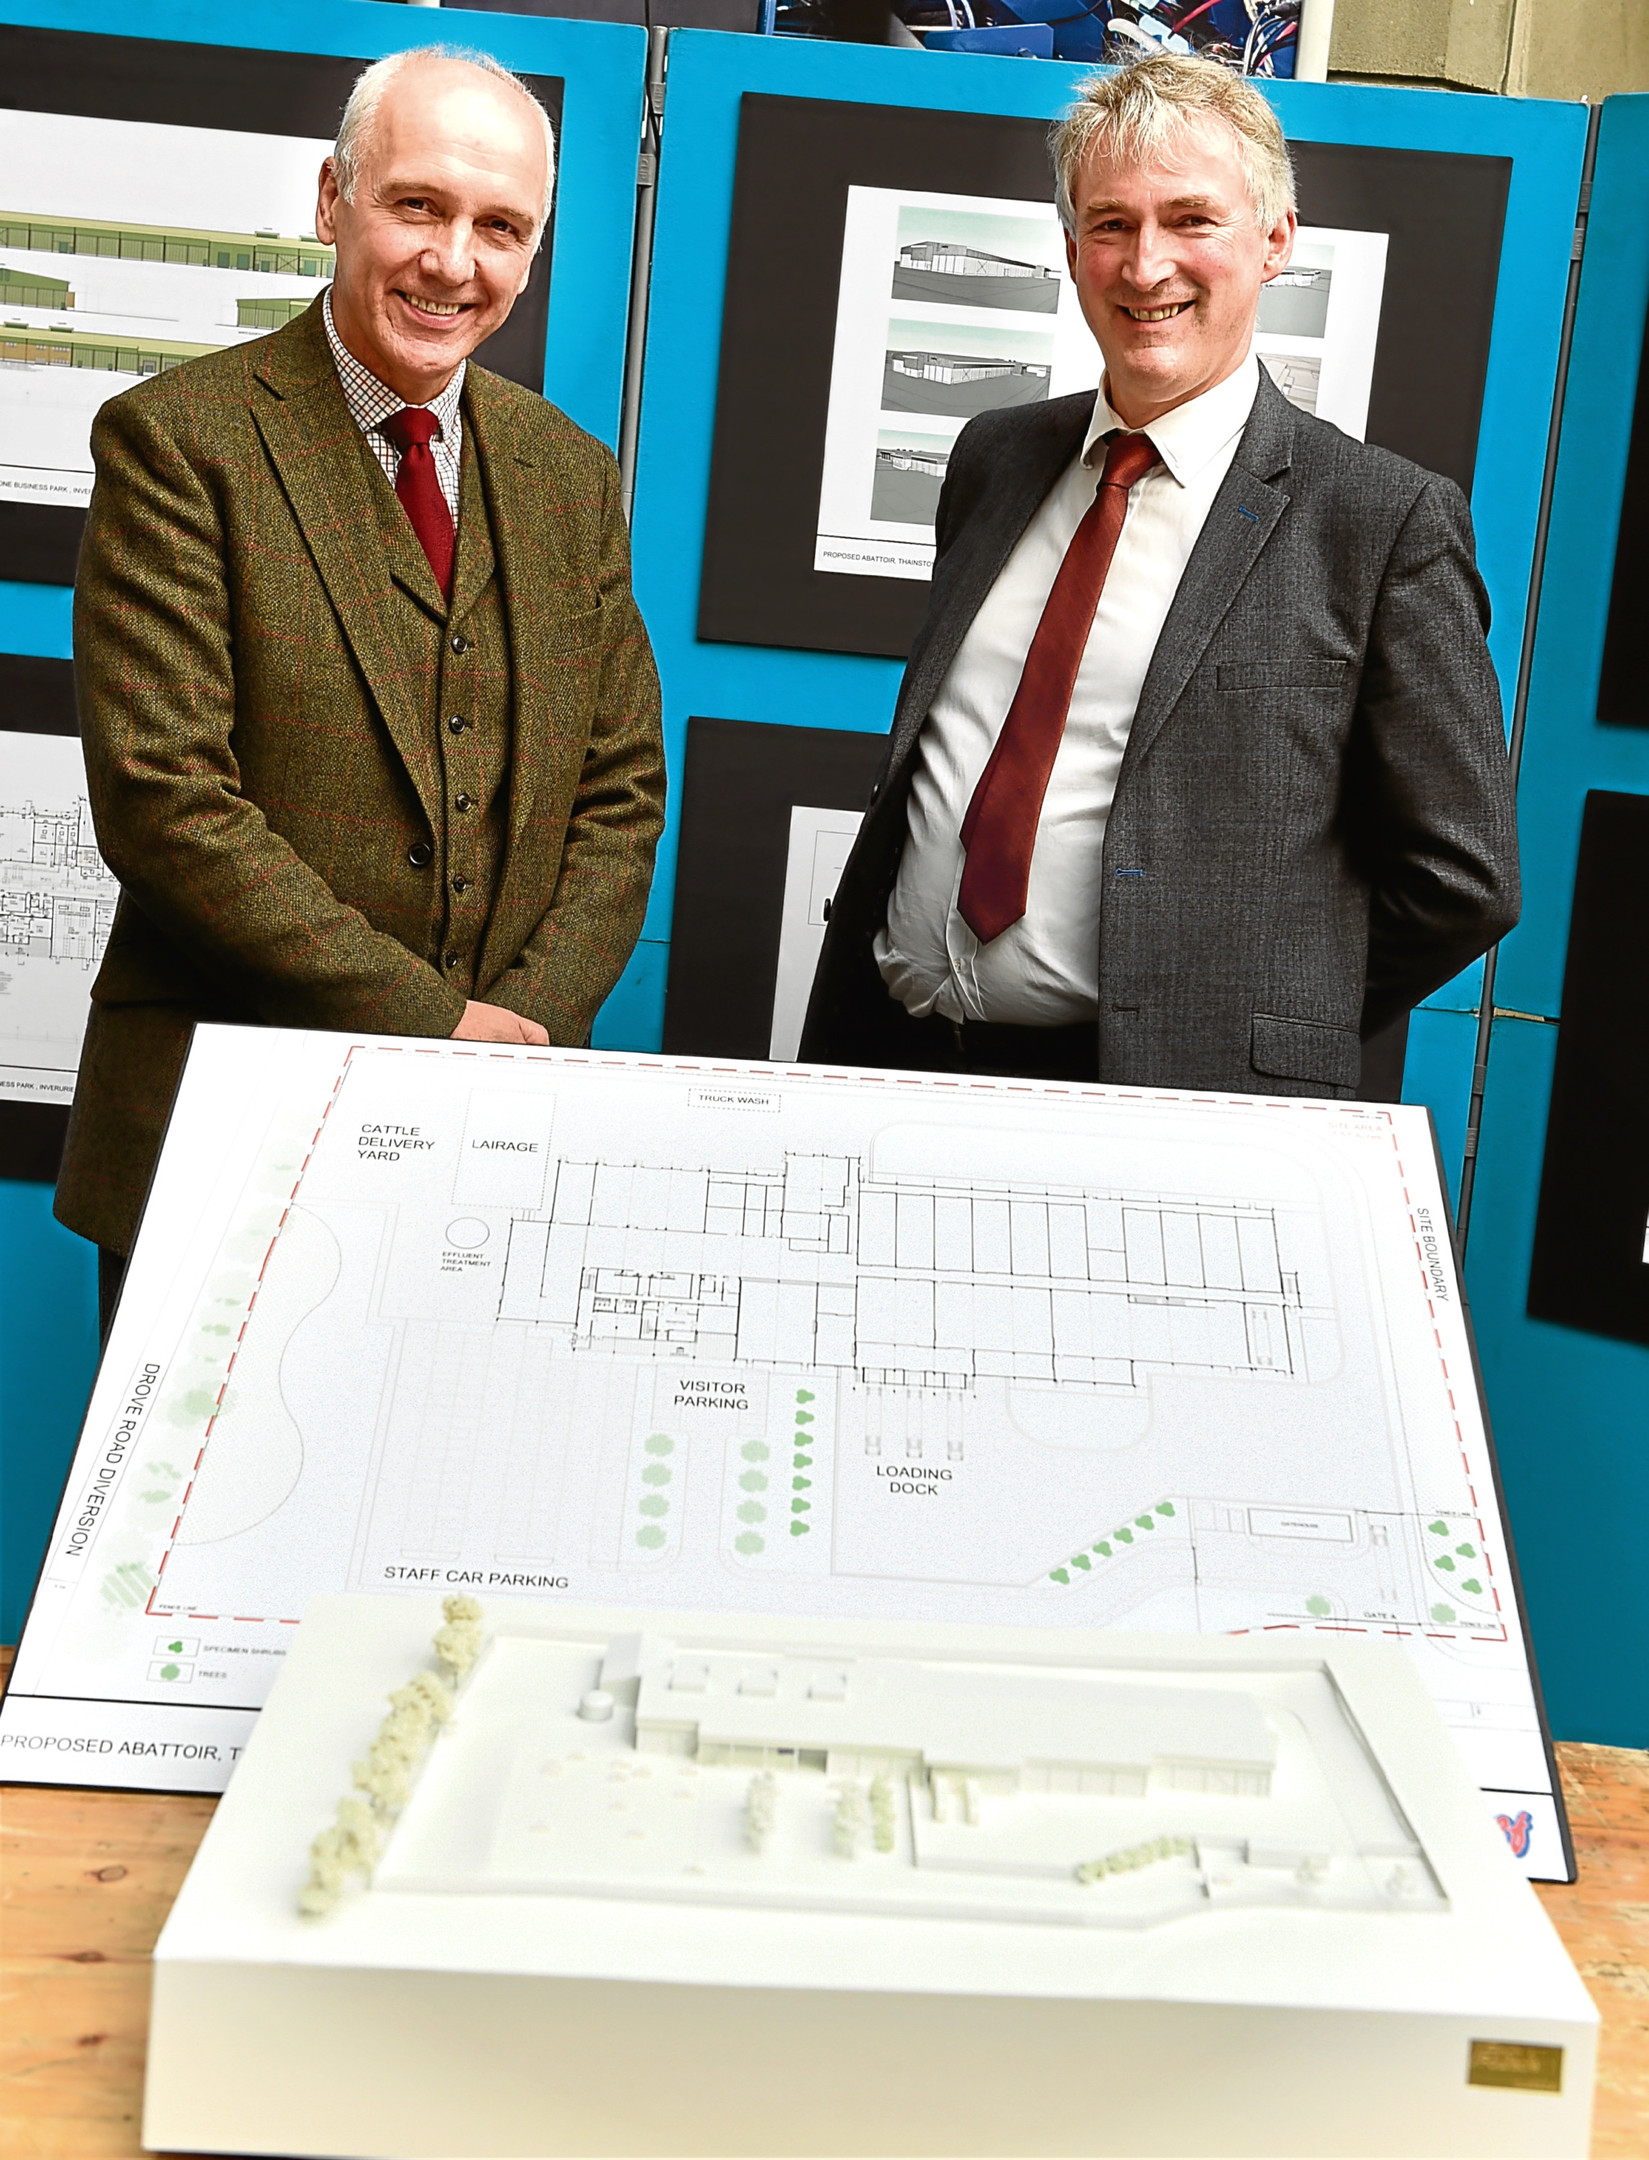 Uel Morton and David Nimmo with plans at the public exhibition